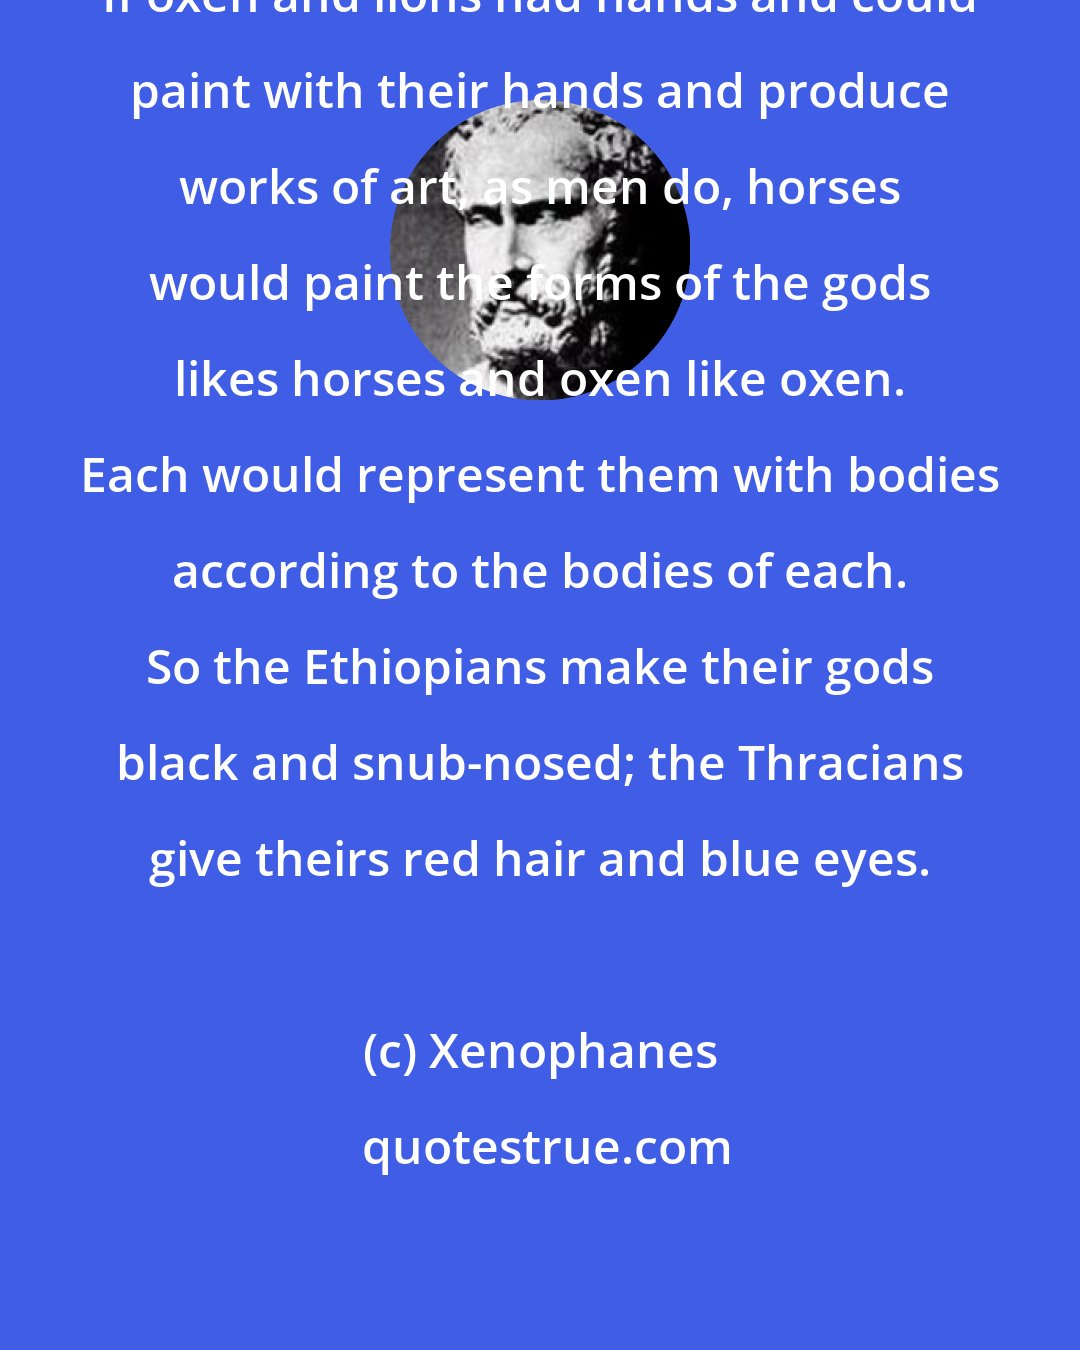 Xenophanes: If oxen and lions had hands and could paint with their hands and produce works of art, as men do, horses would paint the forms of the gods likes horses and oxen like oxen. Each would represent them with bodies according to the bodies of each. So the Ethiopians make their gods black and snub-nosed; the Thracians give theirs red hair and blue eyes.